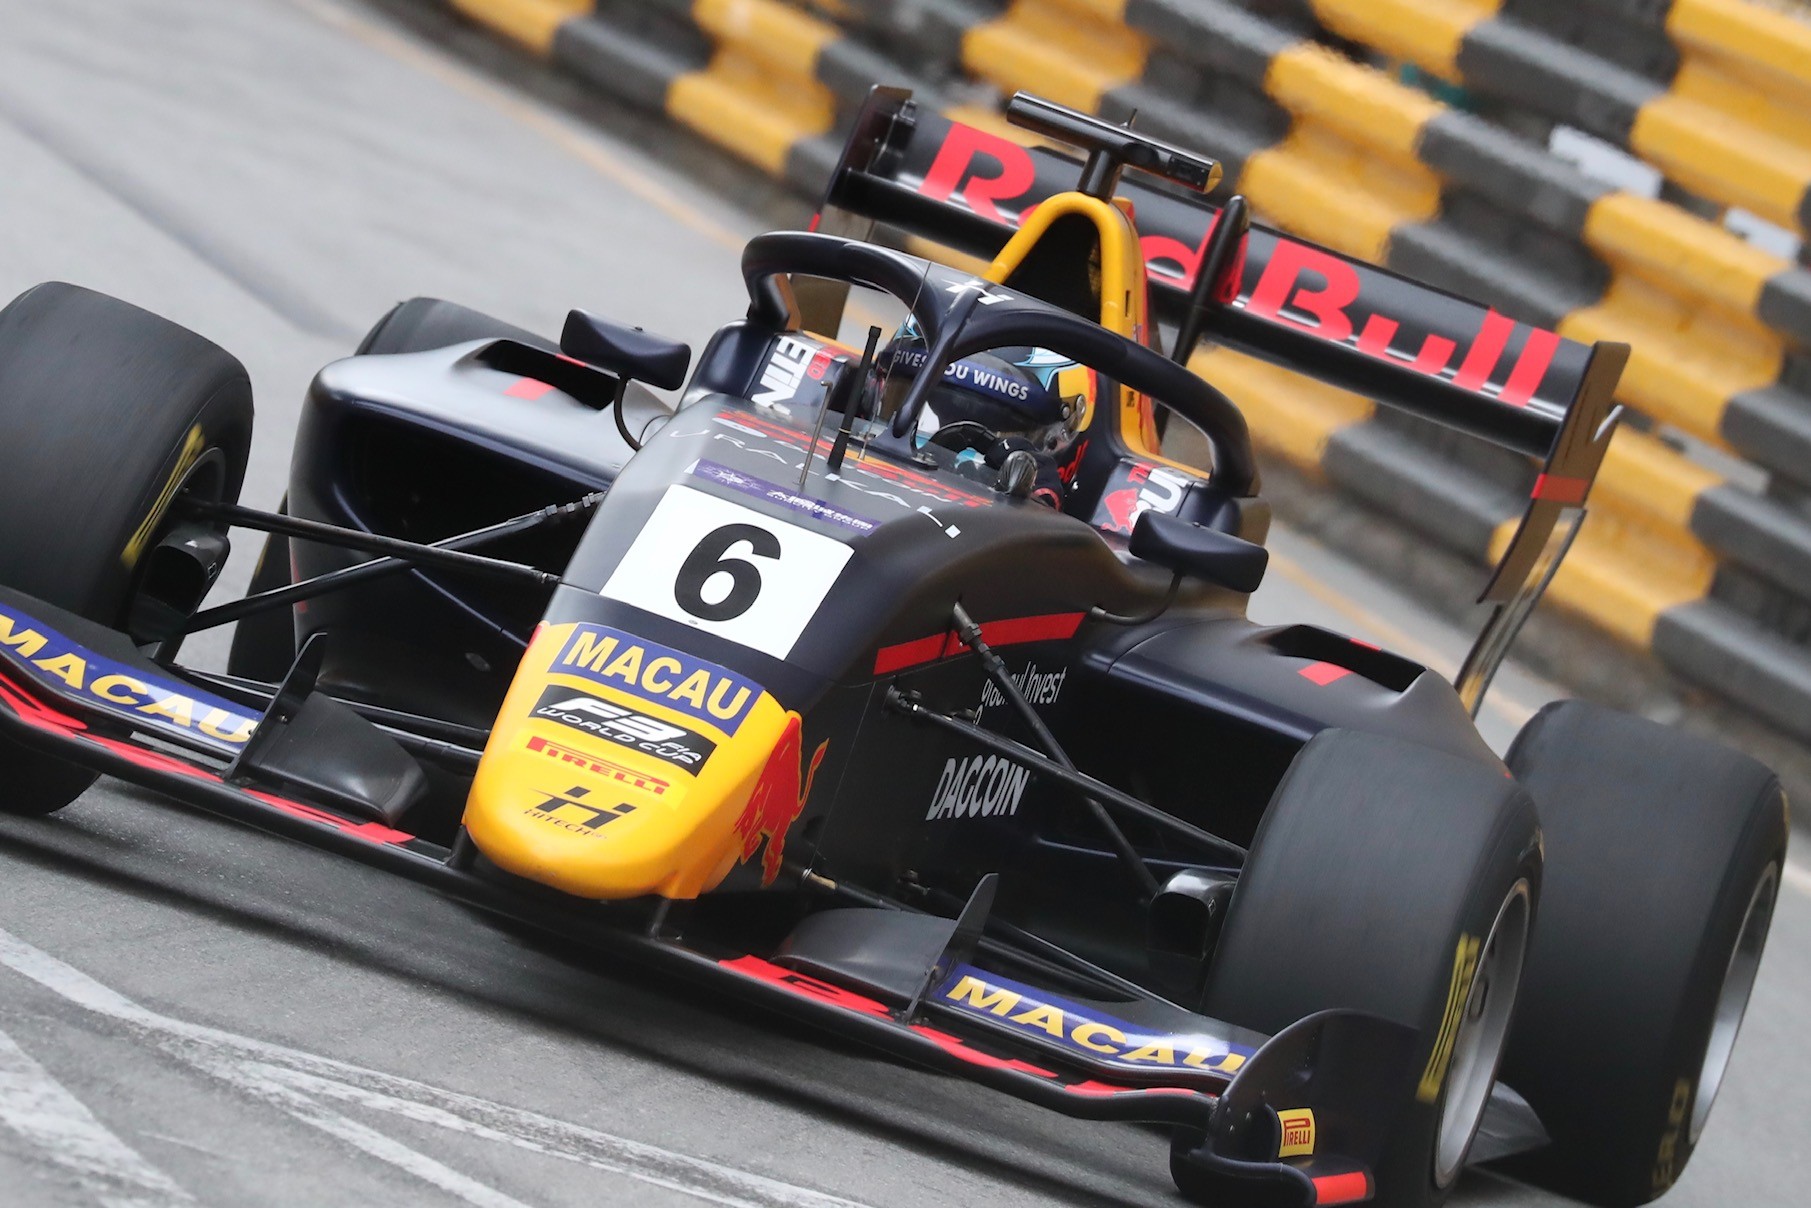 Red Bull junior driver Juri Vips in action at the Macau Grand Prix. Photo: K.Y. Cheng